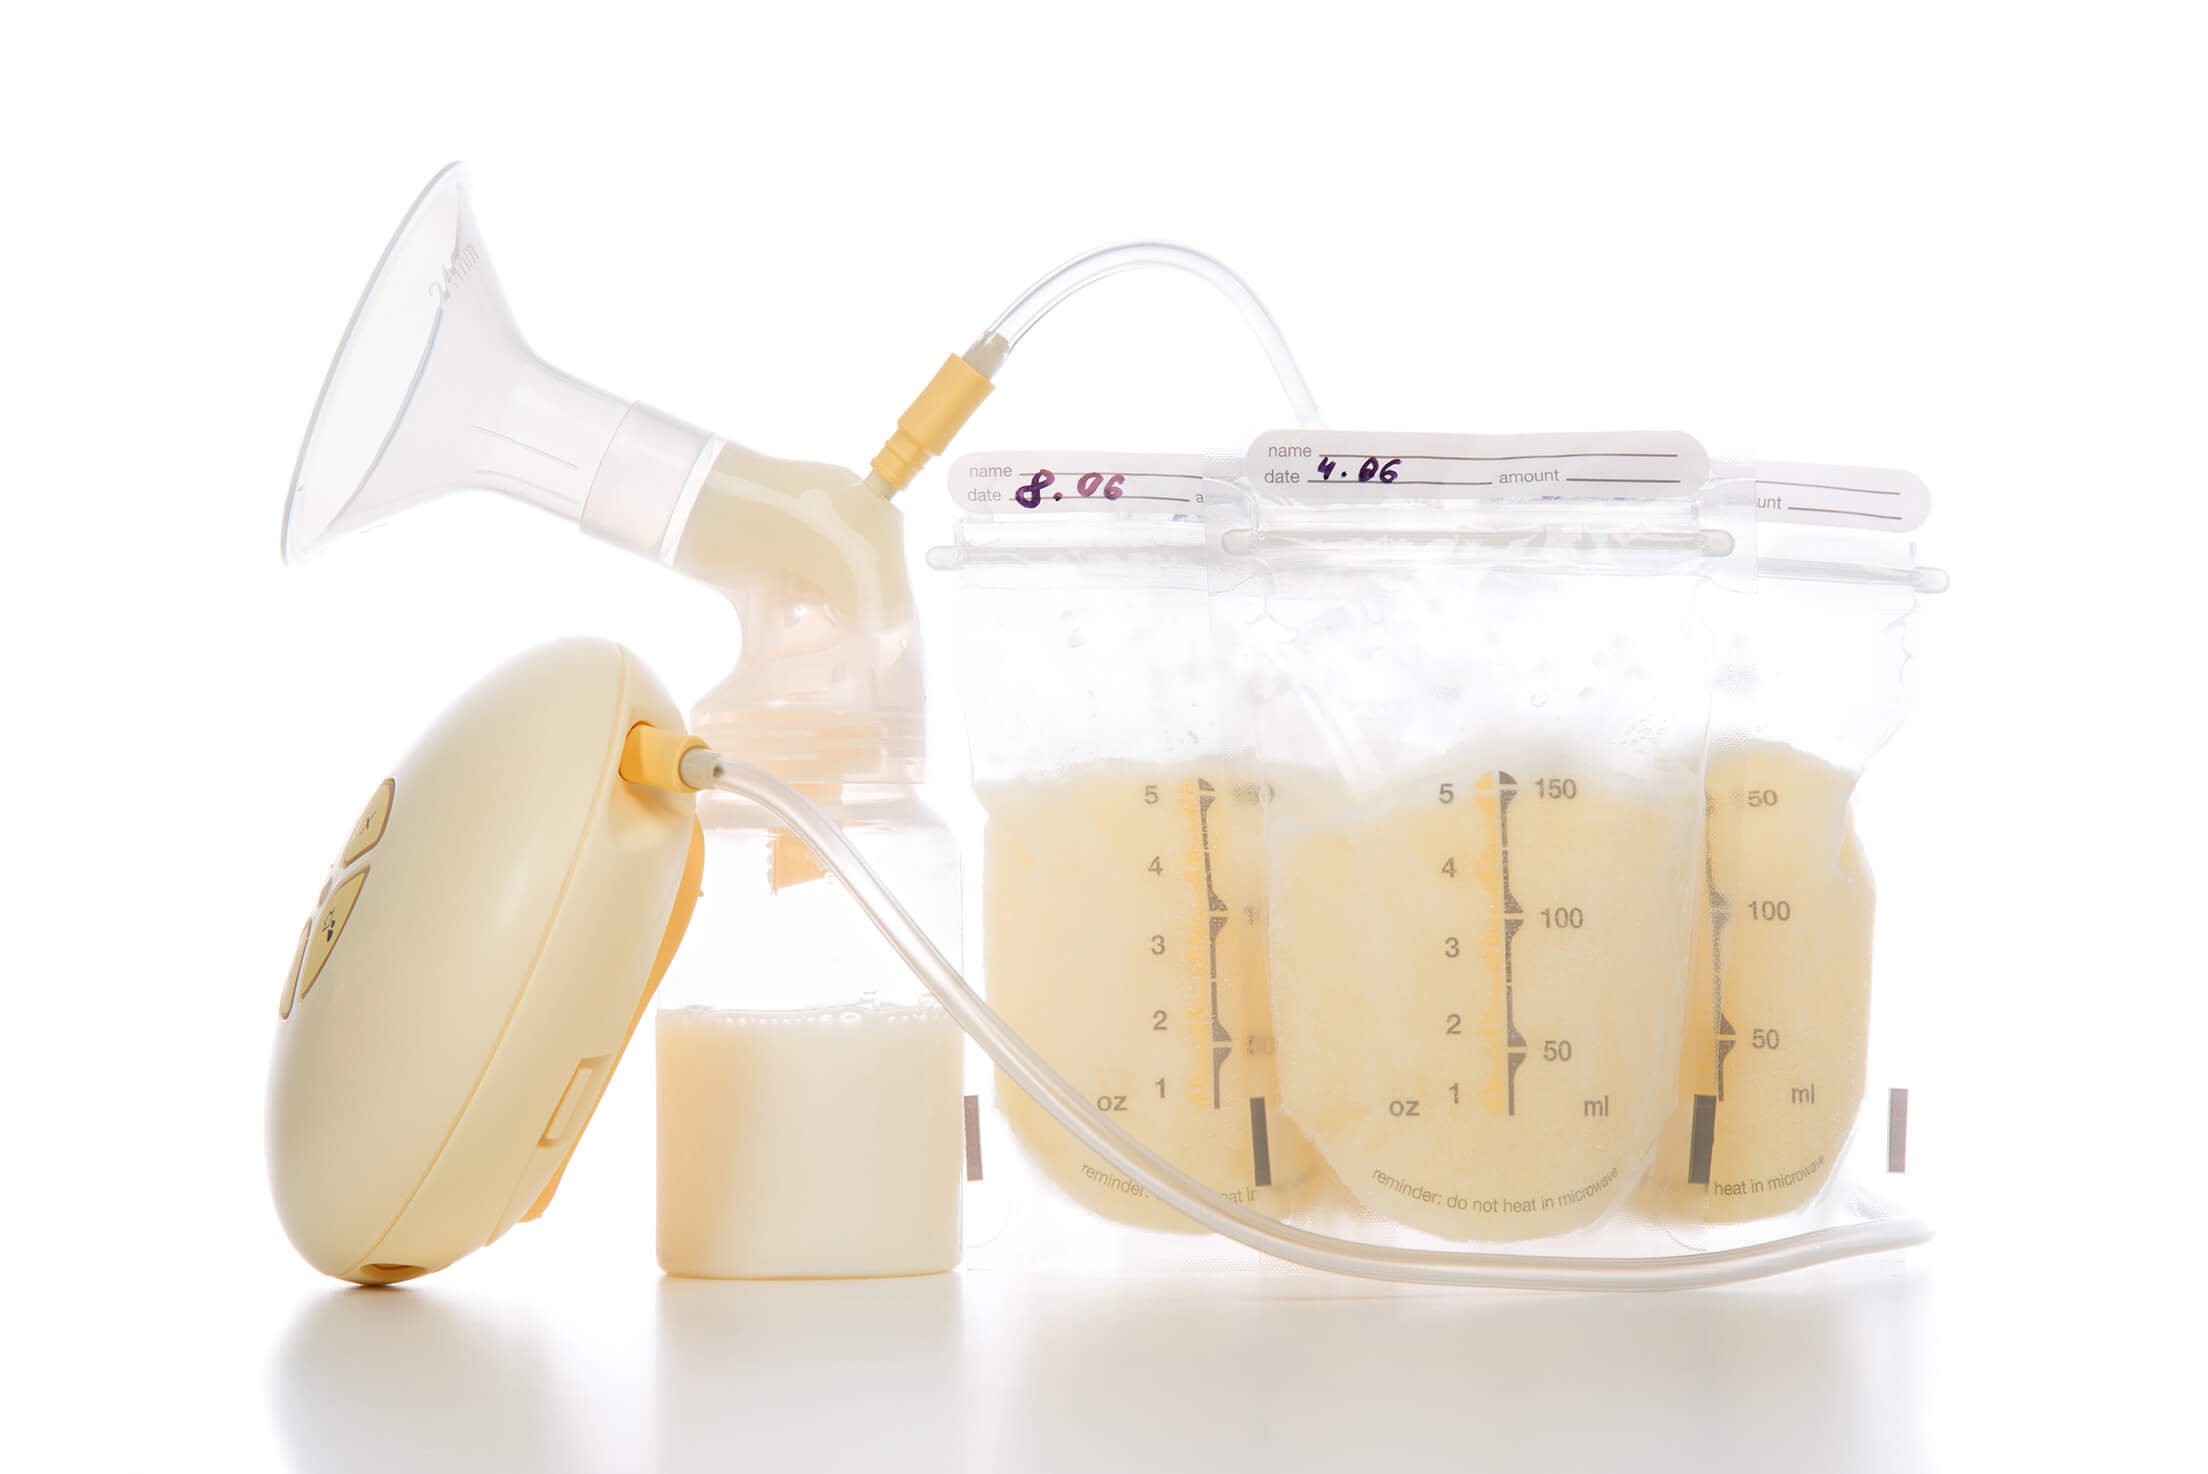 Necessary Supplies for a Breast Pumping Beginner